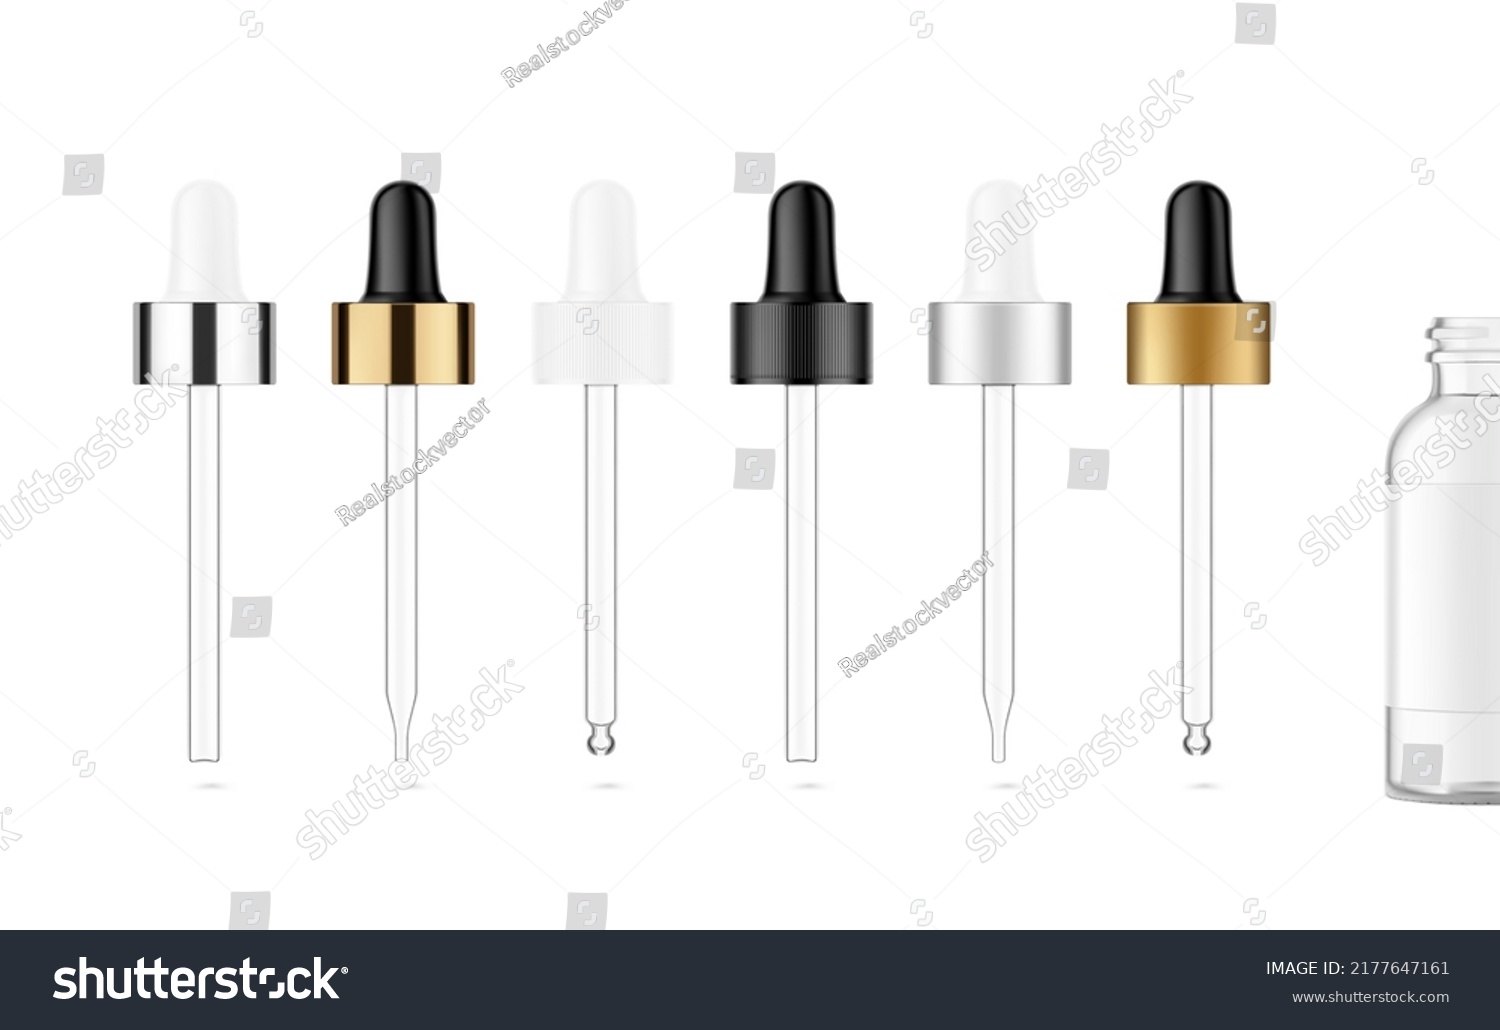 Pipette mockups for dropper bottle  isolated on white background. Vector illustration. Front view. Сan be used for cosmetic, medical and other needs. EPS10. #2177647161